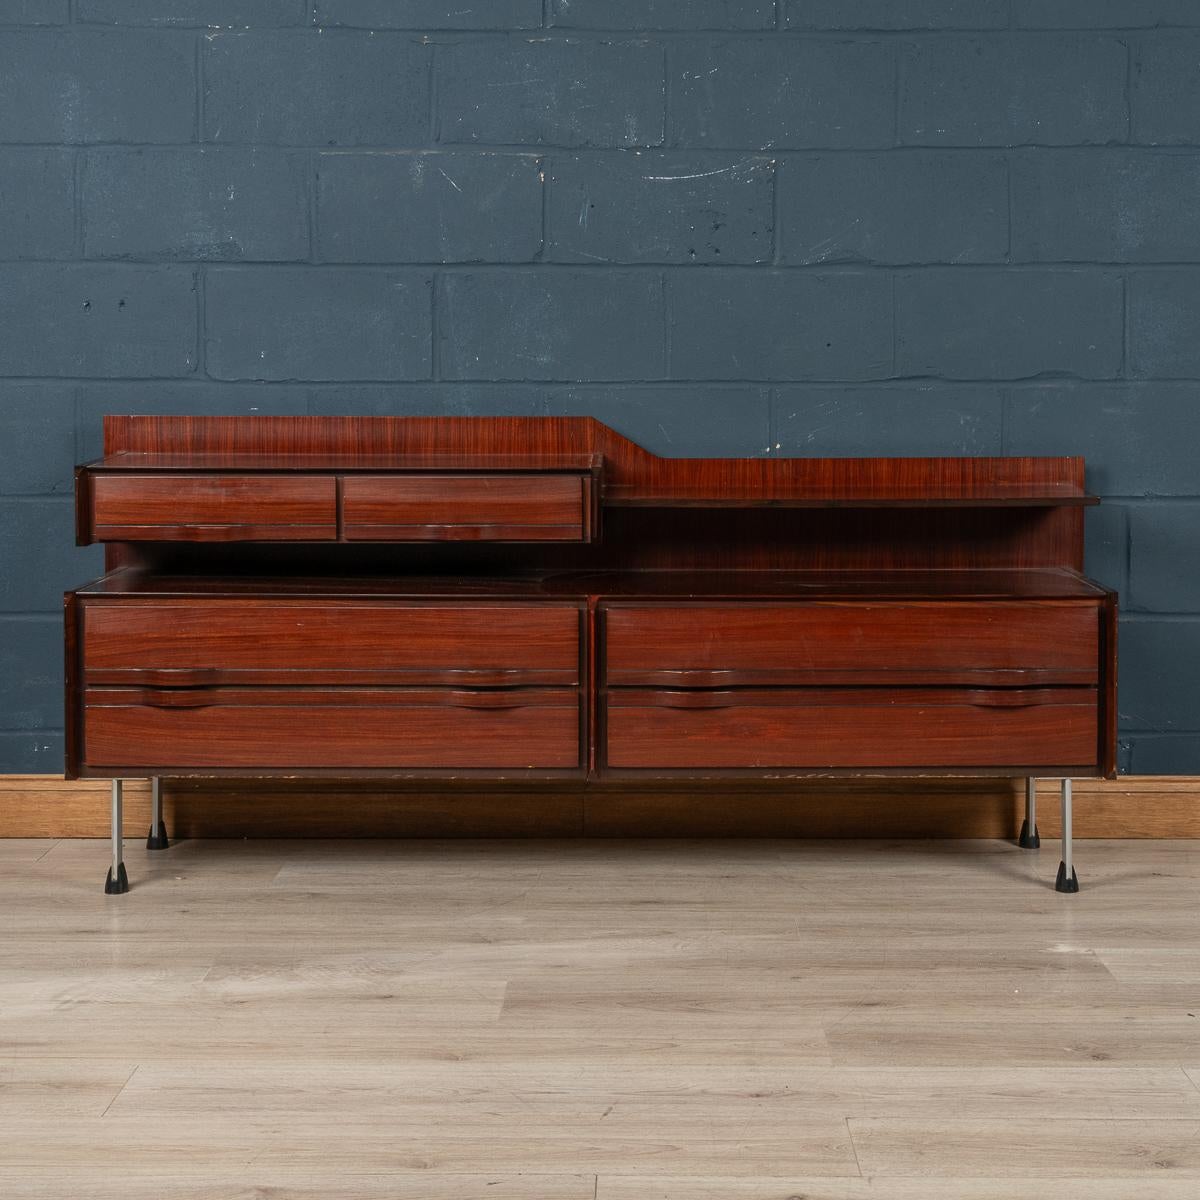 A delightful rosewood sideboard or chest of drawers produced in the 1960's by La Sorgente dei Mobili in Arosio near Milan, Italy. The drawers open to reveal a lovely light wood veneers interior (possibly cedar wood) which really shows the attention